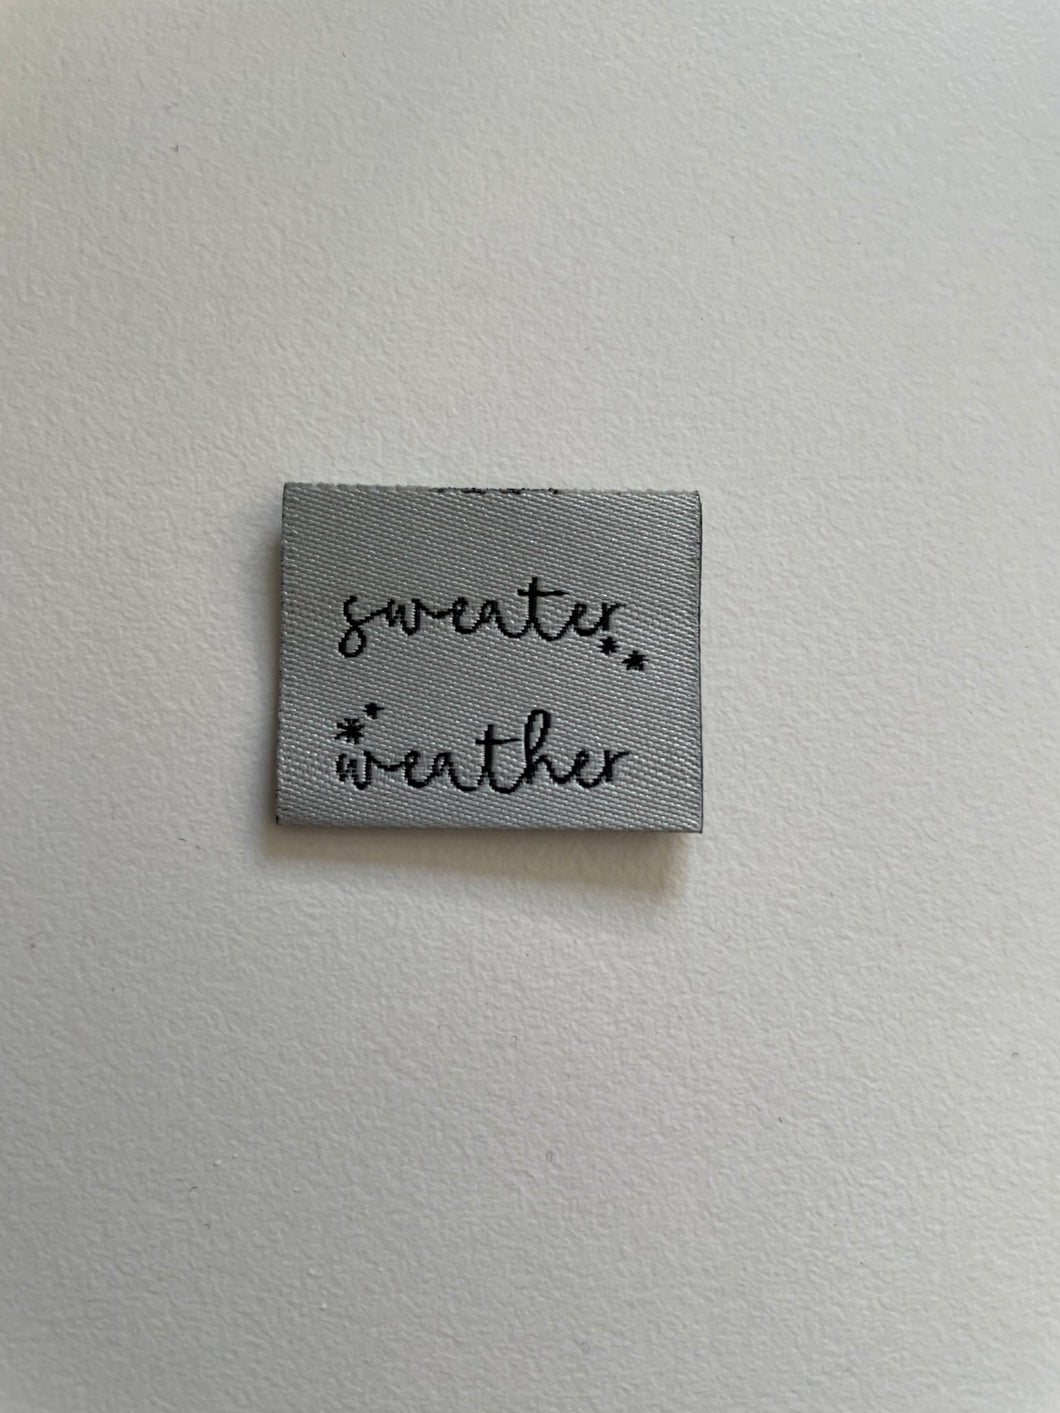 Sweater Weather Label